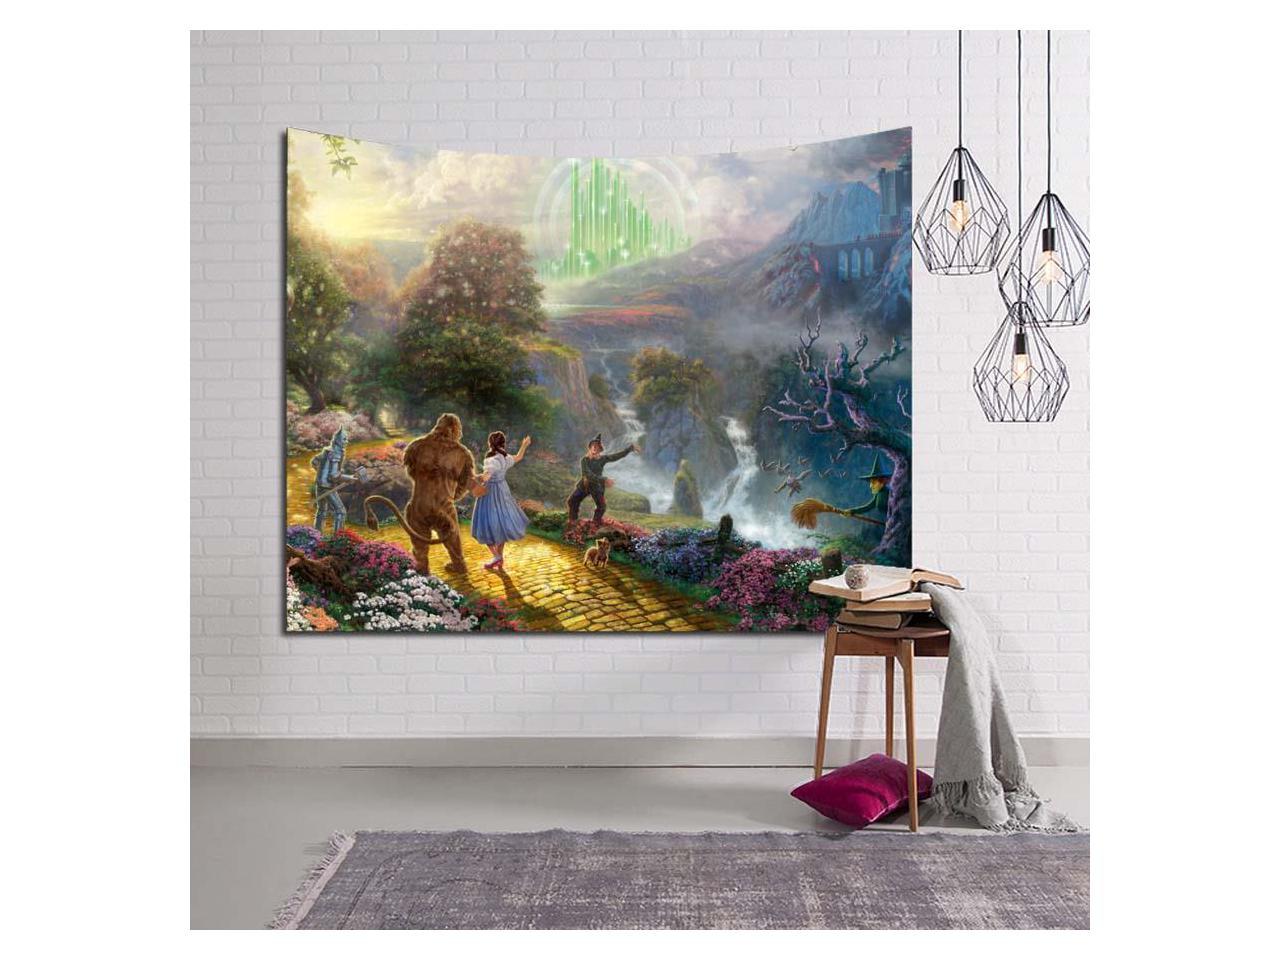 The Wizard Of Oz Style 150x200 Cm Wall Hanging Tapestry For Wall Decoration Newegg Com